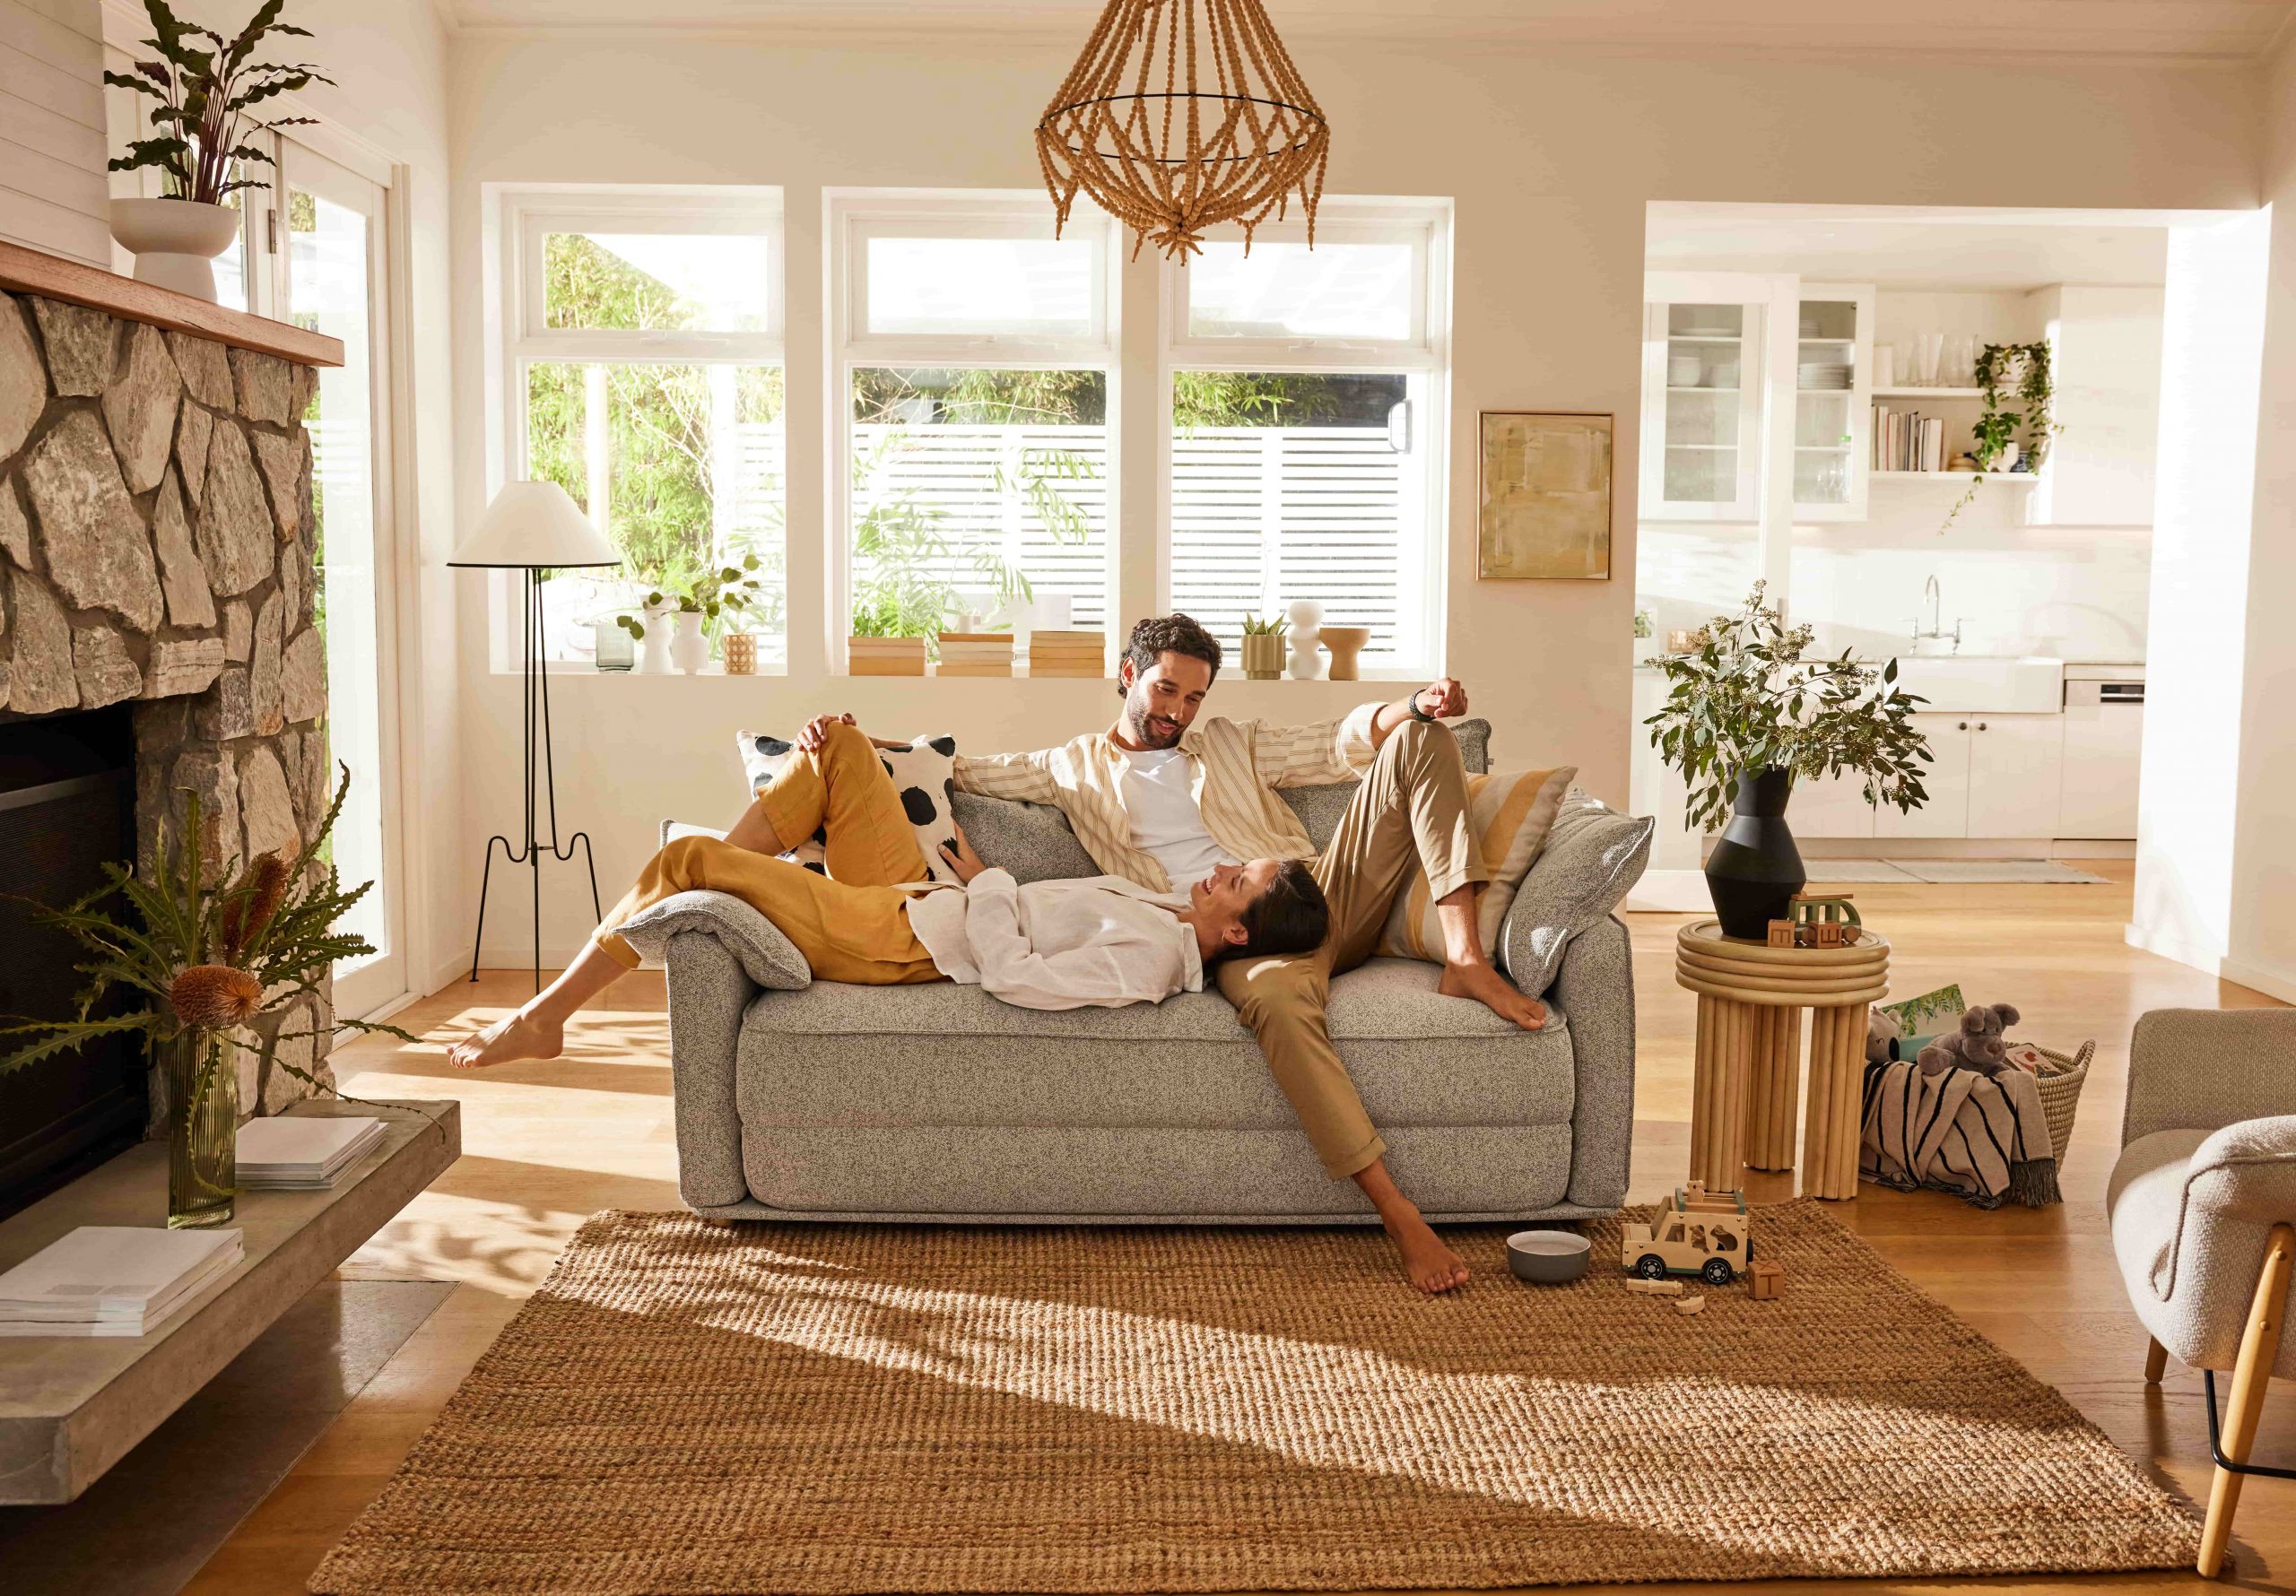 Koala furniture pieces in a bright and clean living room that exudes the coastal Hamptons-style living room look